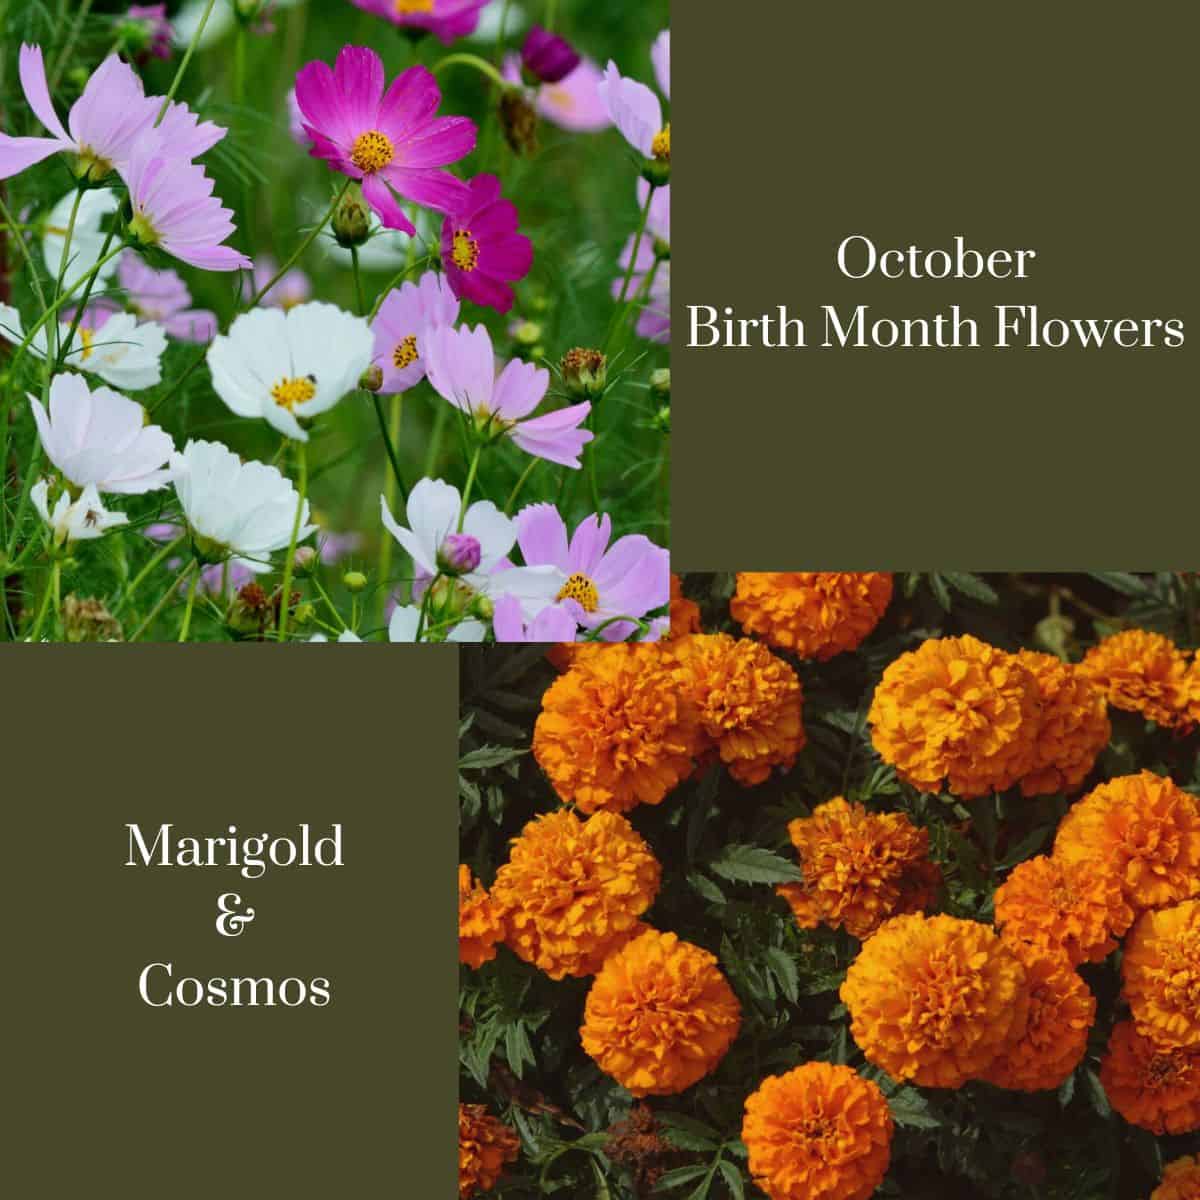 october birth month flowers graphic with marigold and cosmos